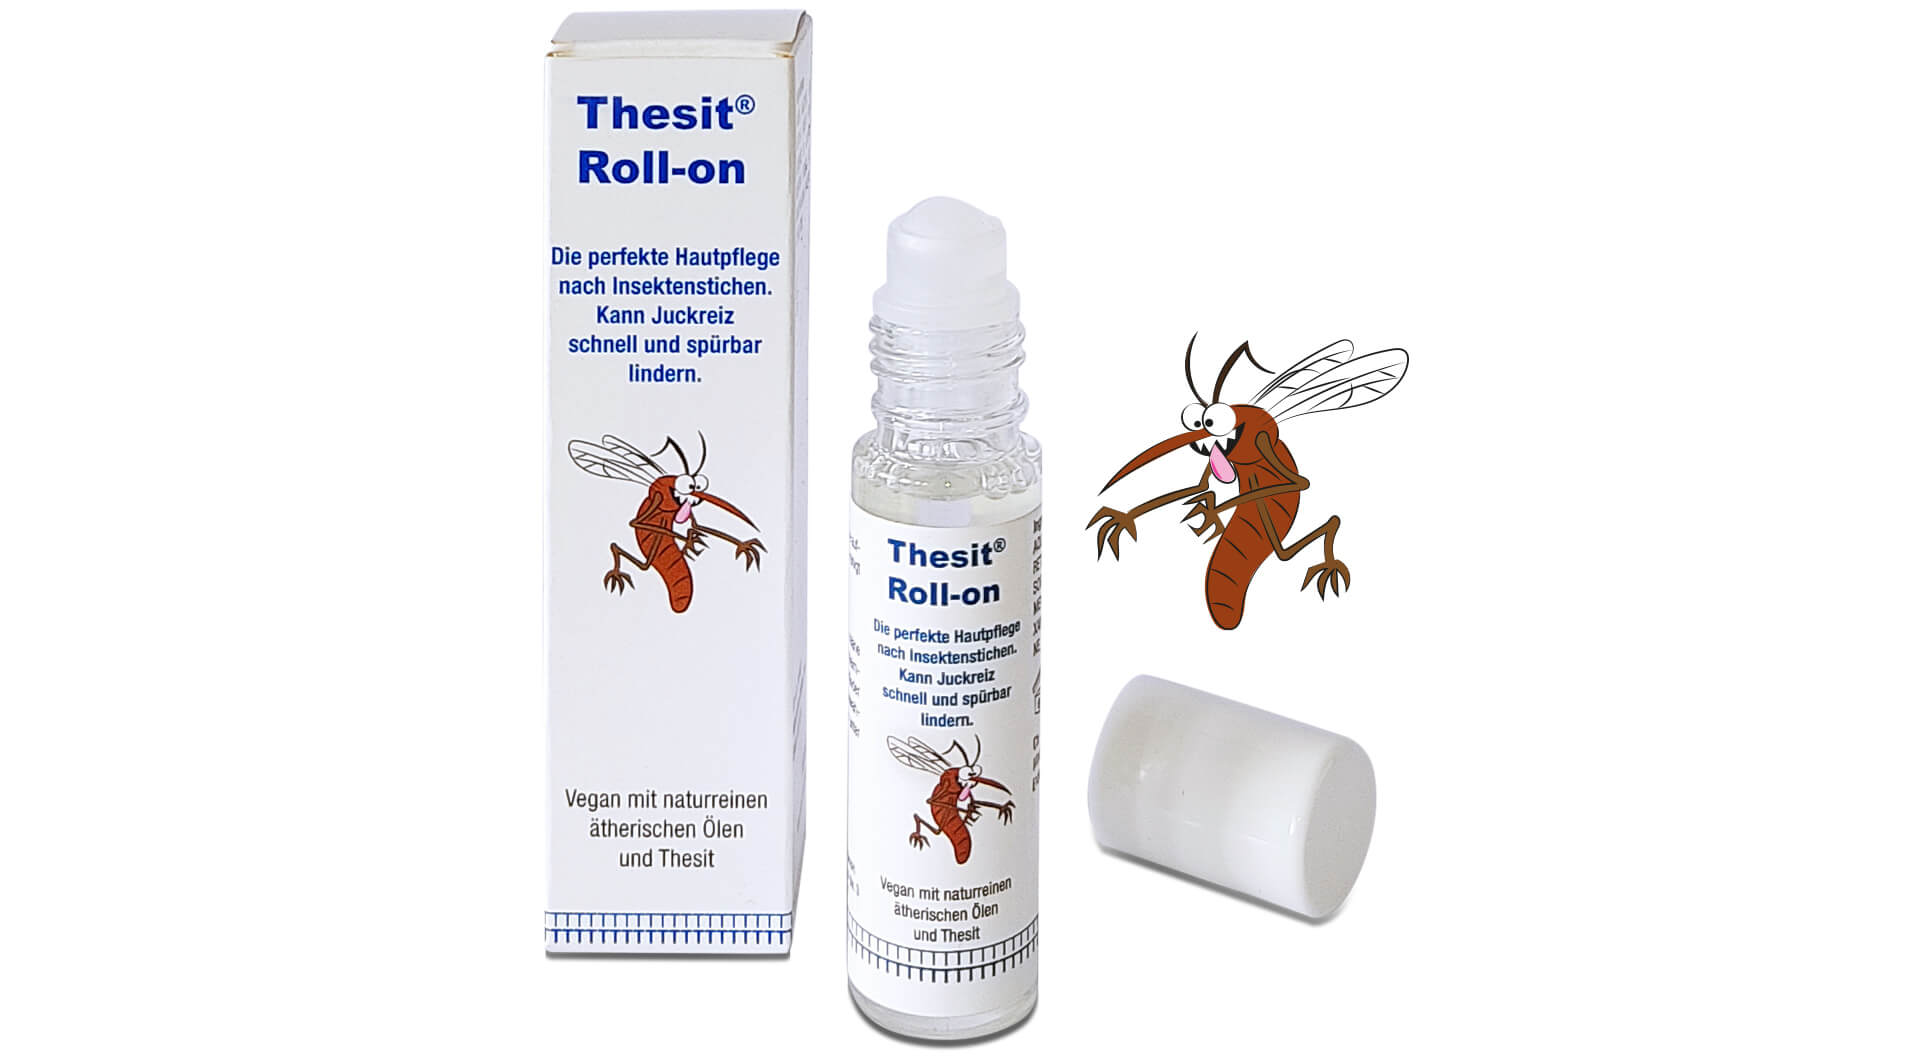 Thesit Roll-on